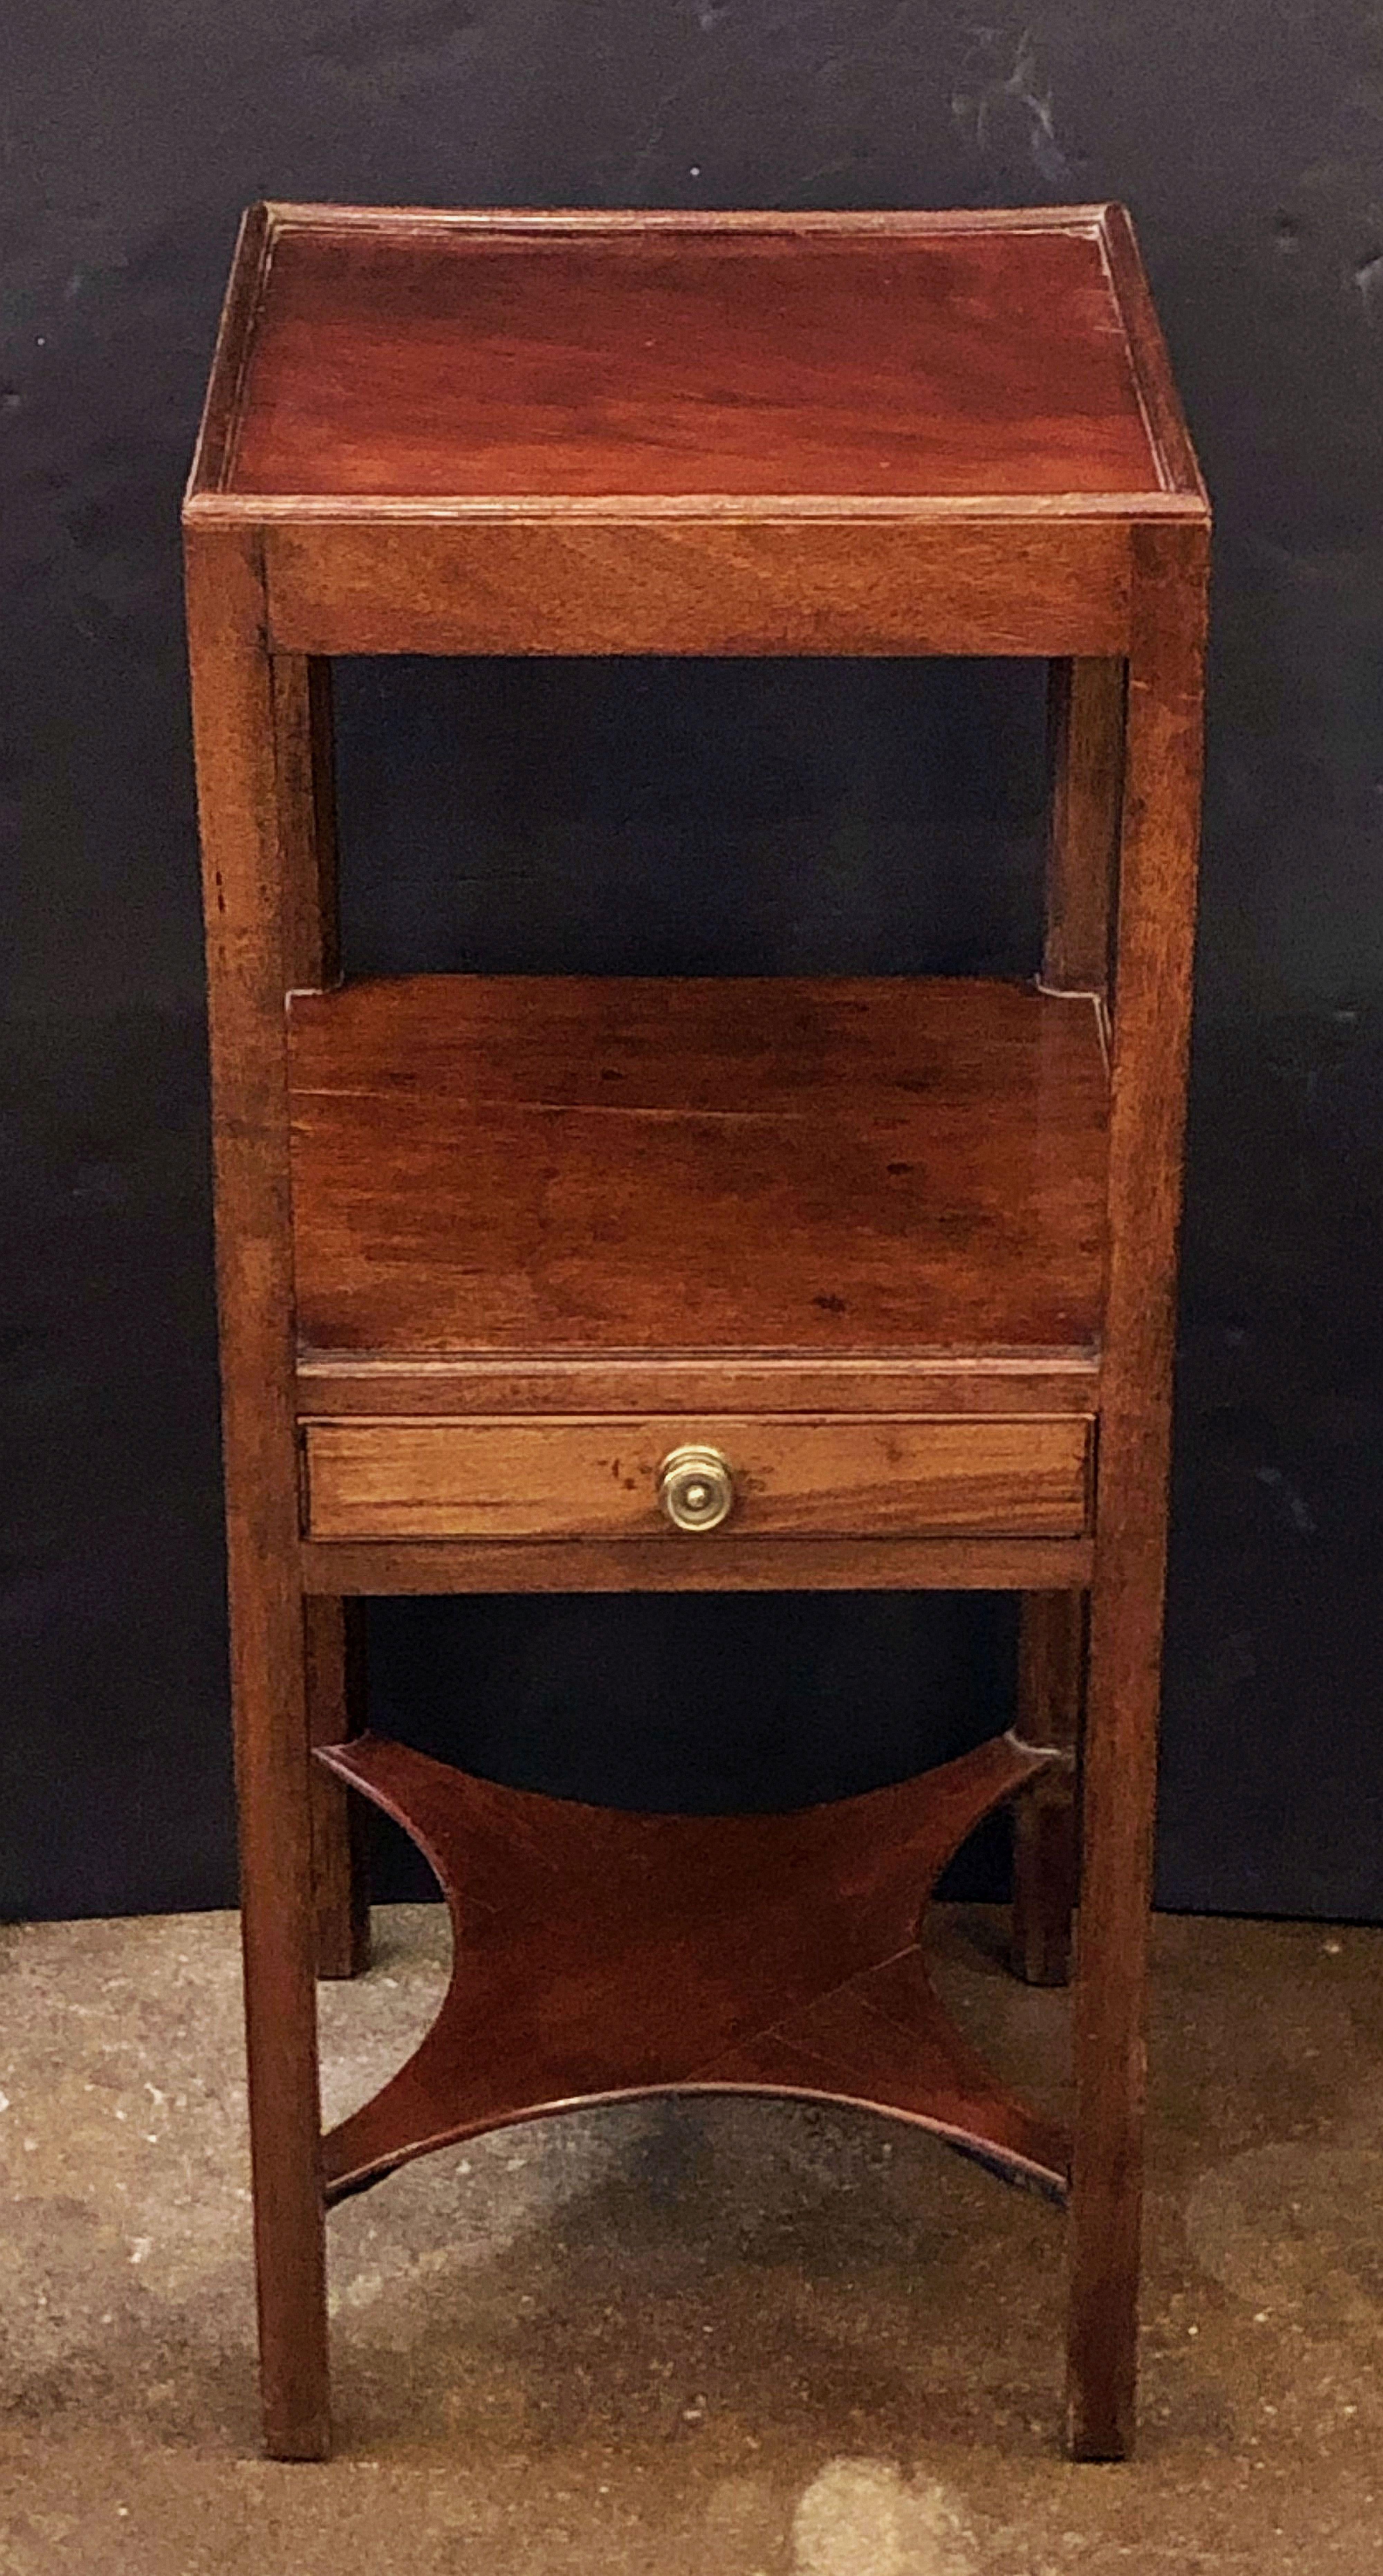 A fine English nightstand or end (side) table of mahogany, with molded top over two tiers, one with shelf and small pull drawer, the other a stretcher support.

Dimensions: H 29 1/2 inches x W 15 1/2 inches x D 12 1/2 inches.